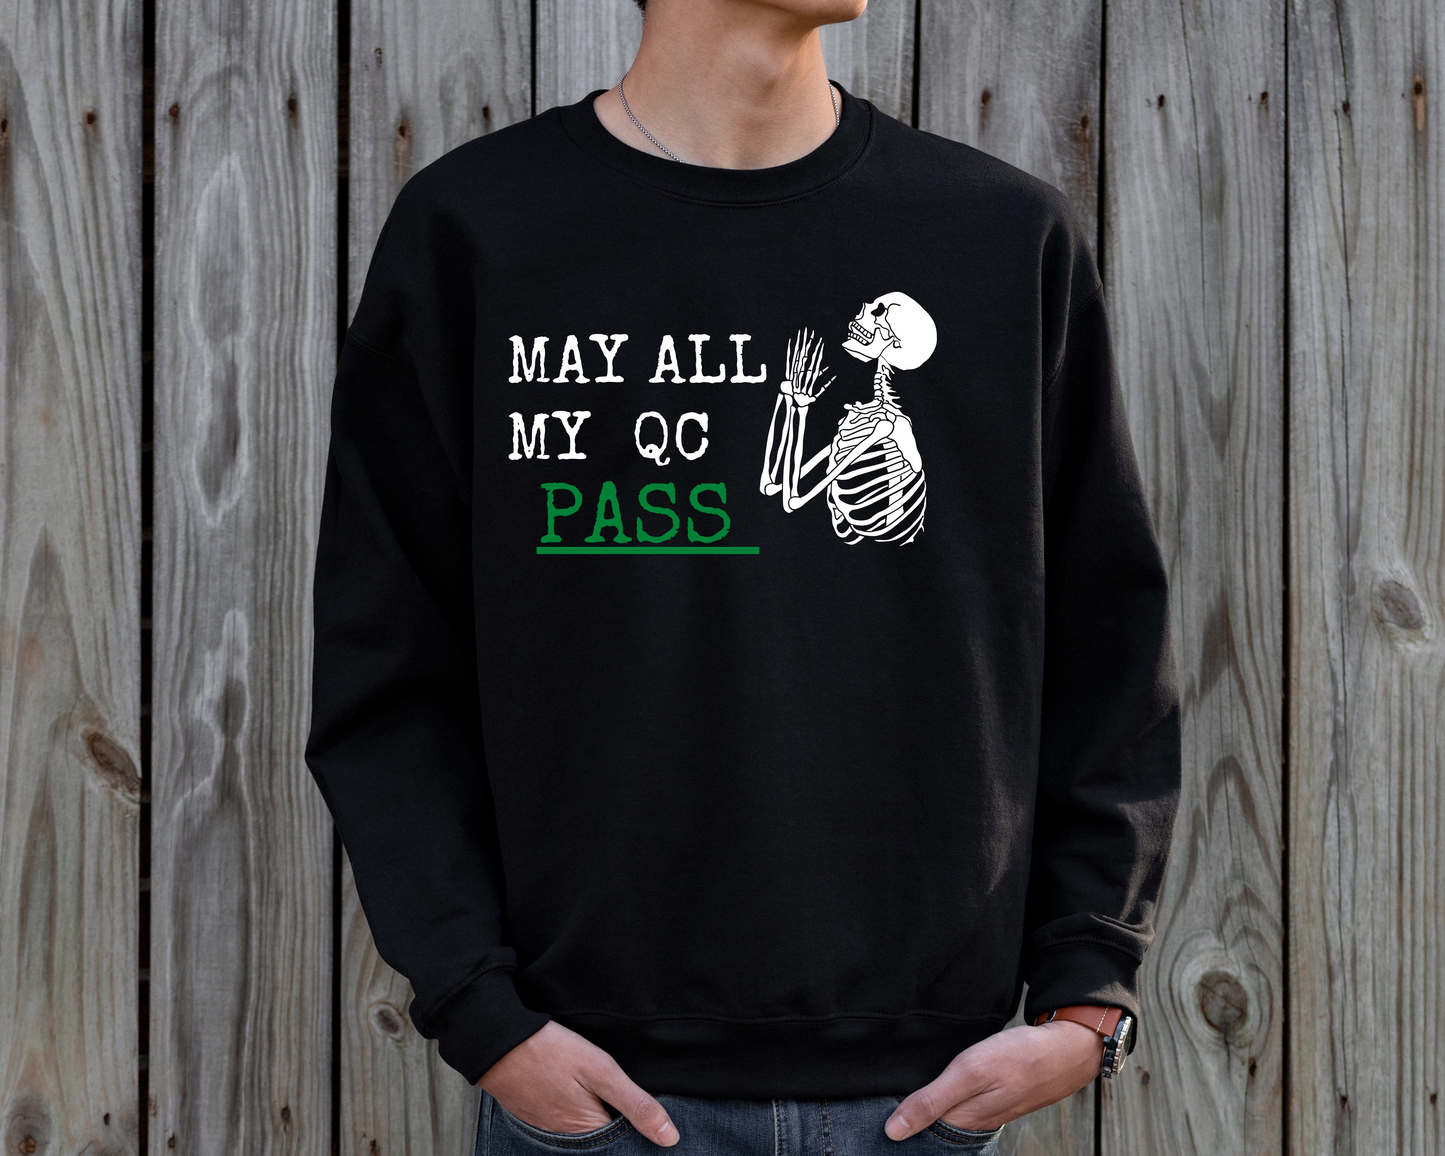 May all my QC pass Crew Neck Sweater